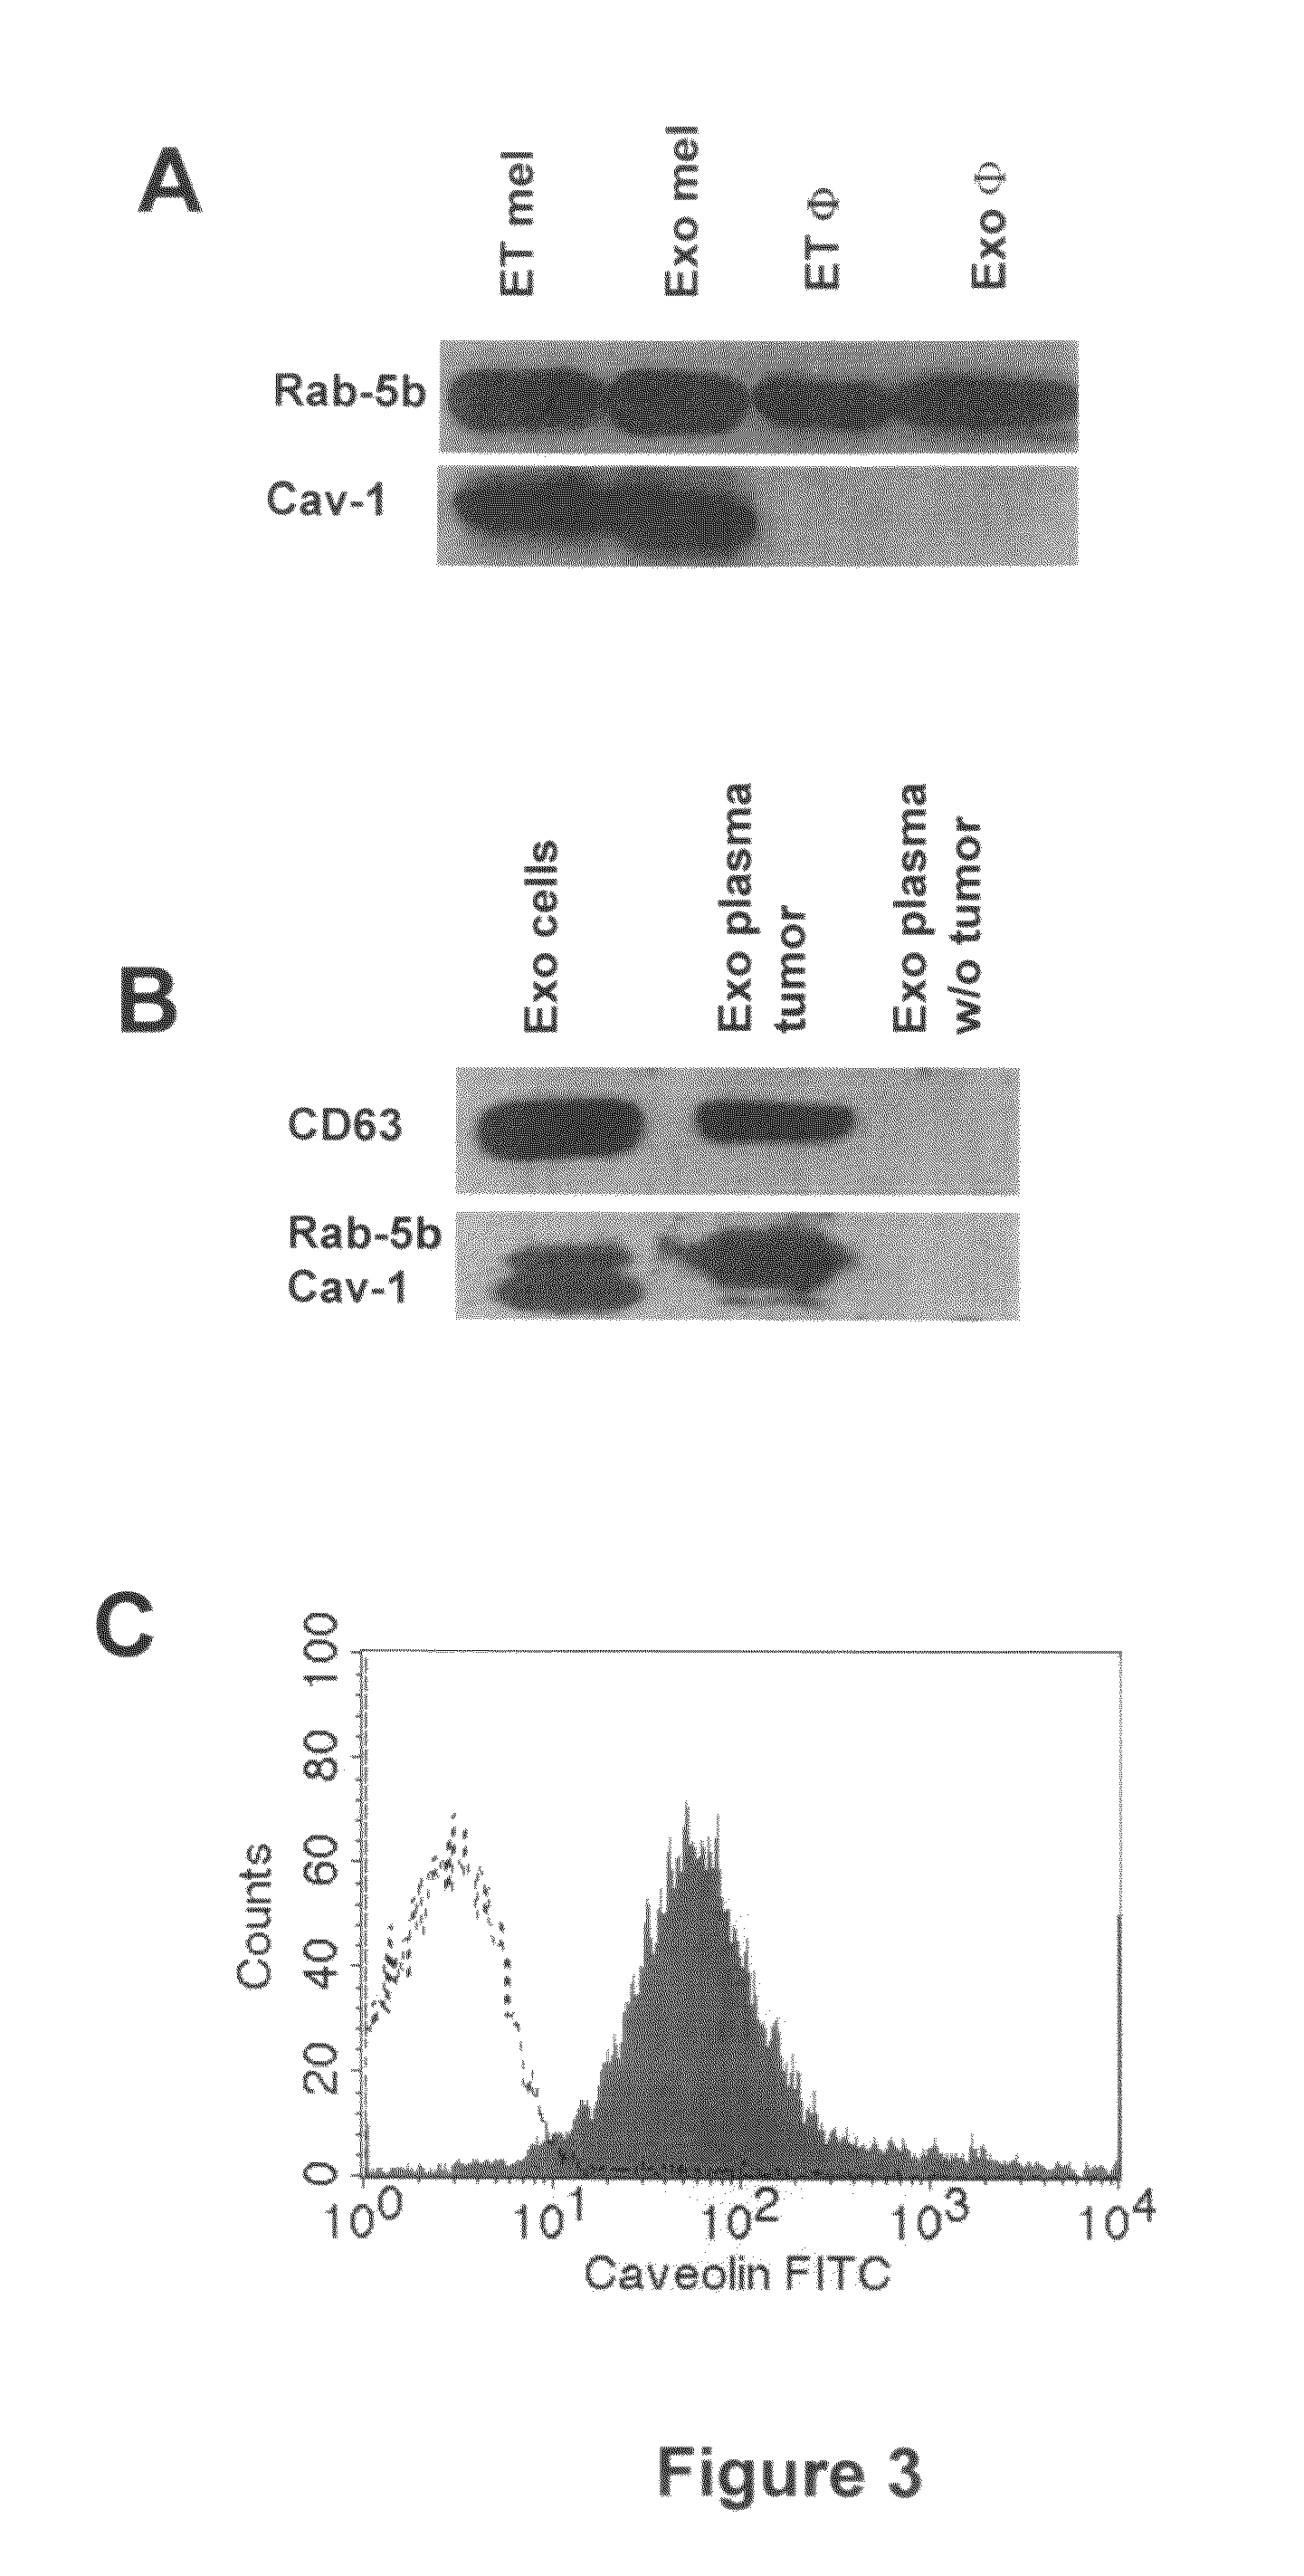 Method to measure and characterize microvesicles in the human body fluids